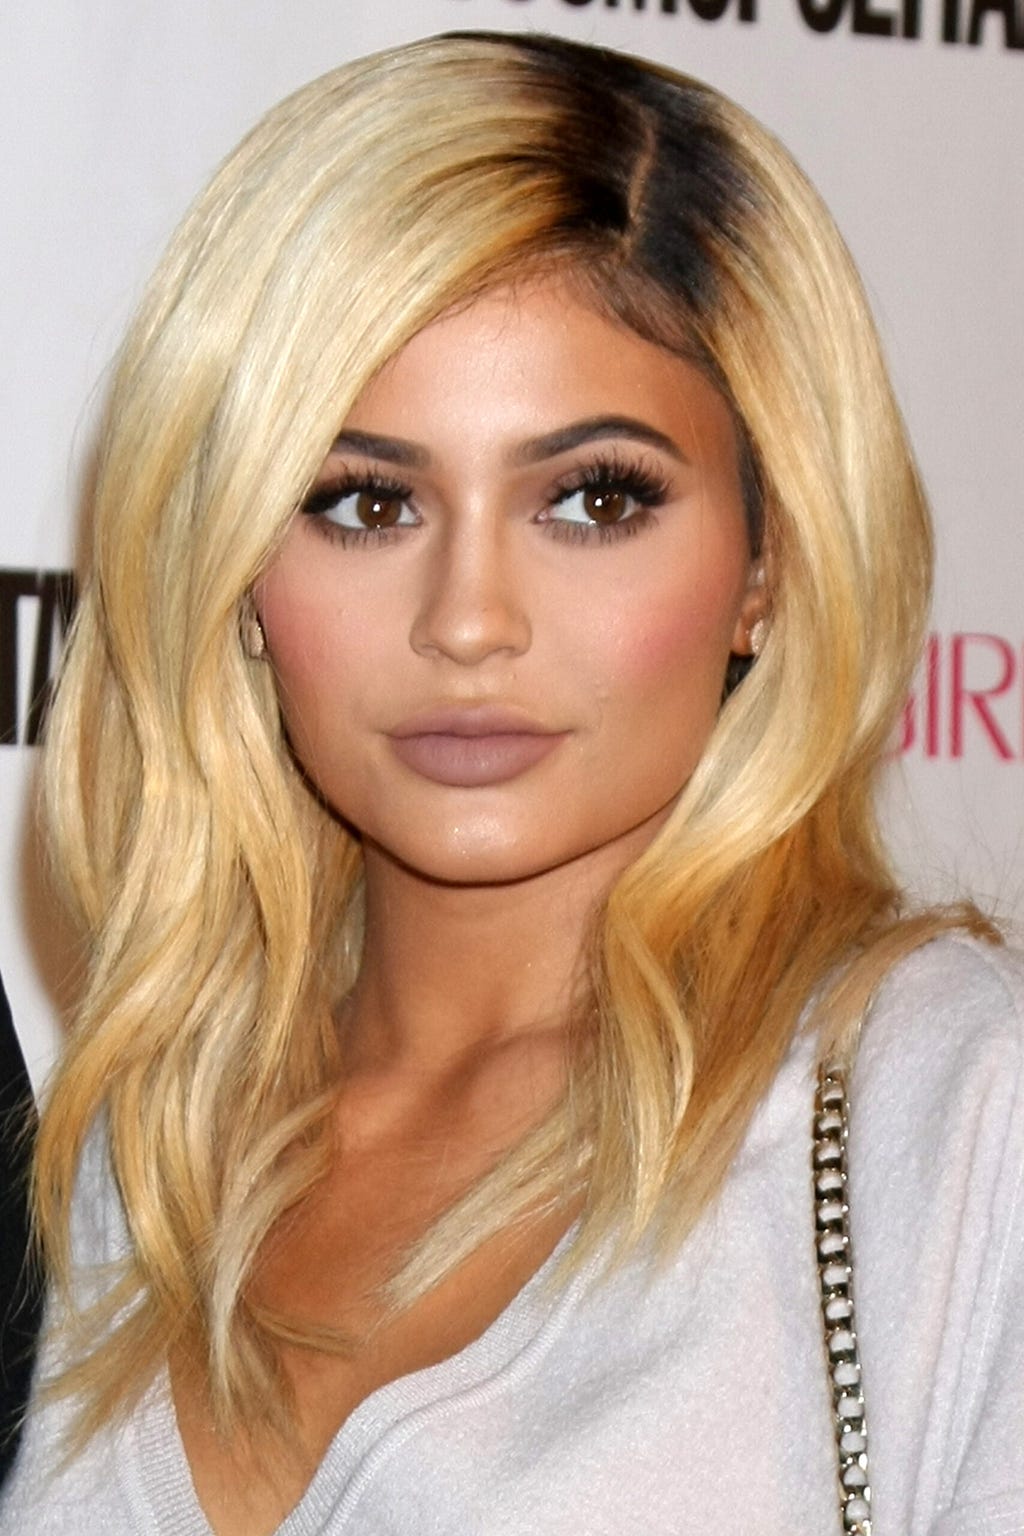 Kylie Jenner: The Unseen Facts